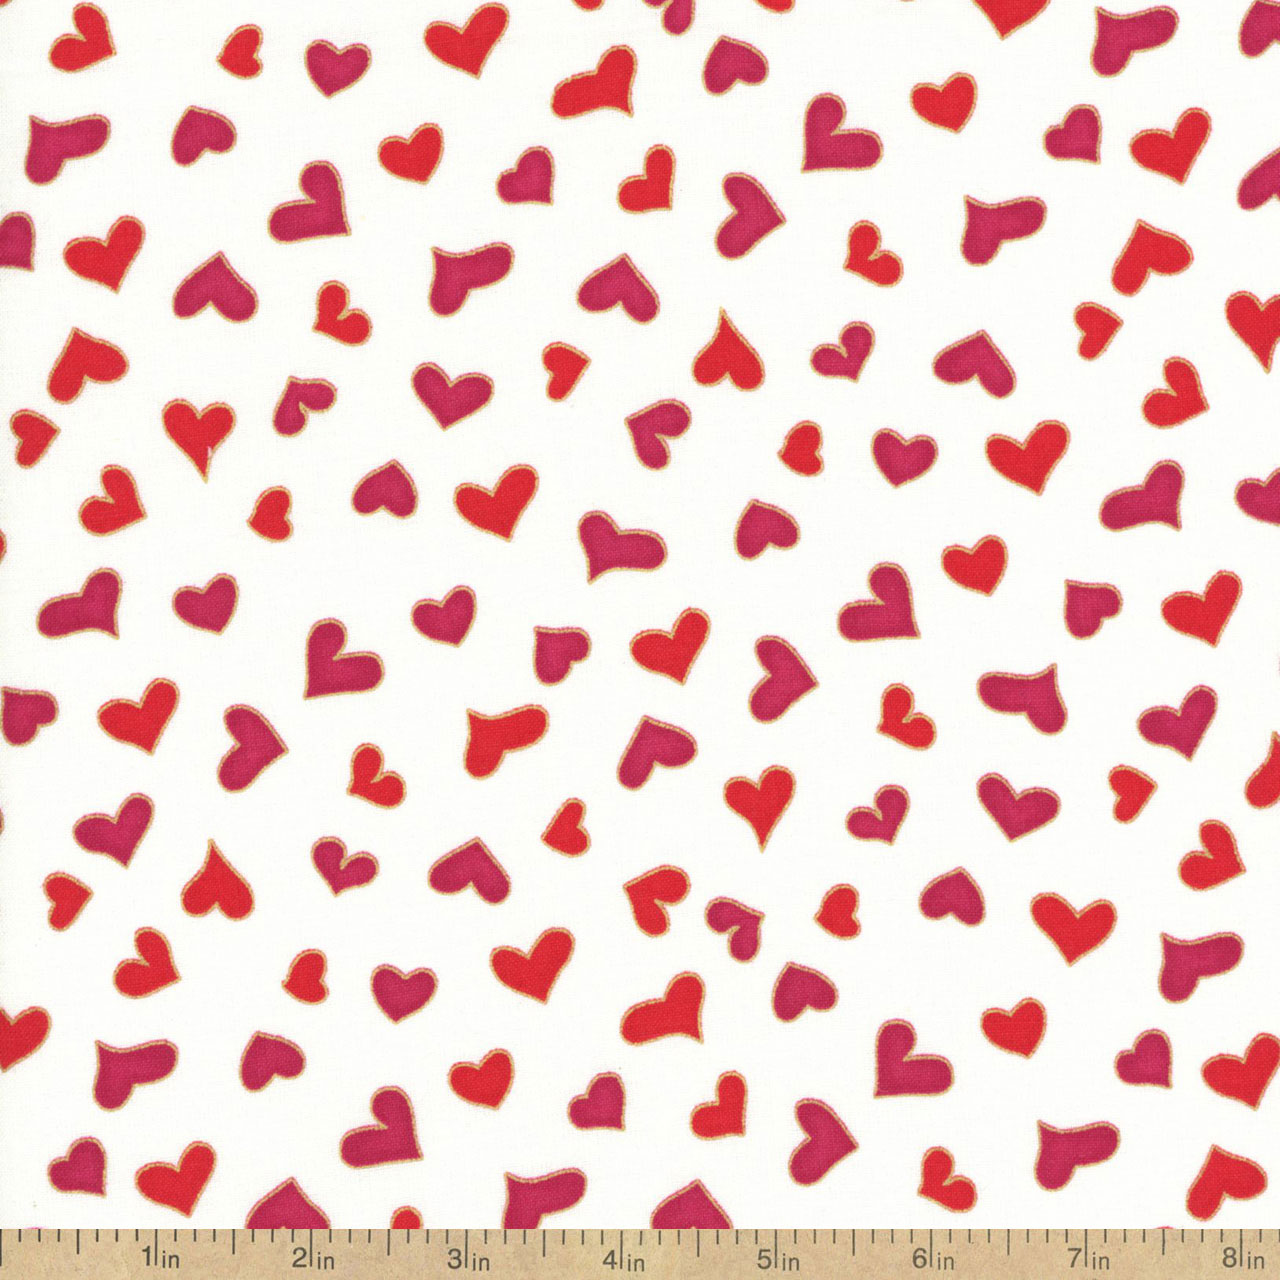 Hearts of Gold Small Hearts Cotton Fabric - White - Beverlys.com